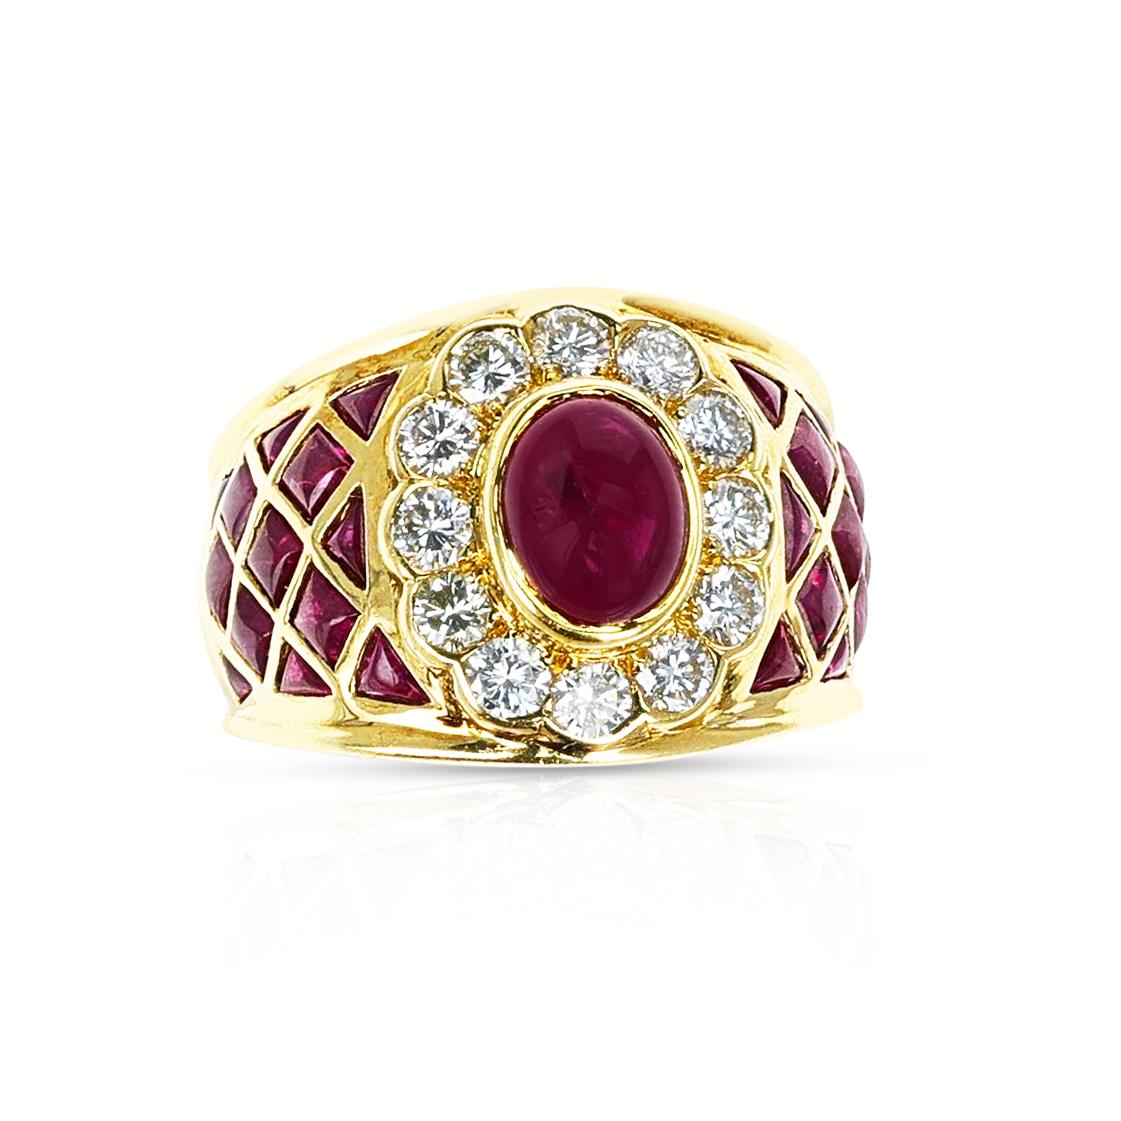 A Ruby Cabochon Cocktail Ring with Rubies and Diamonds made in 18 Karat Yellow Gold. The total weight of the ring is 14.30 grams. The ring size is US 6.  The diamonds weigh appx. 0.95 carats and the rubies are appx. 4 cts.